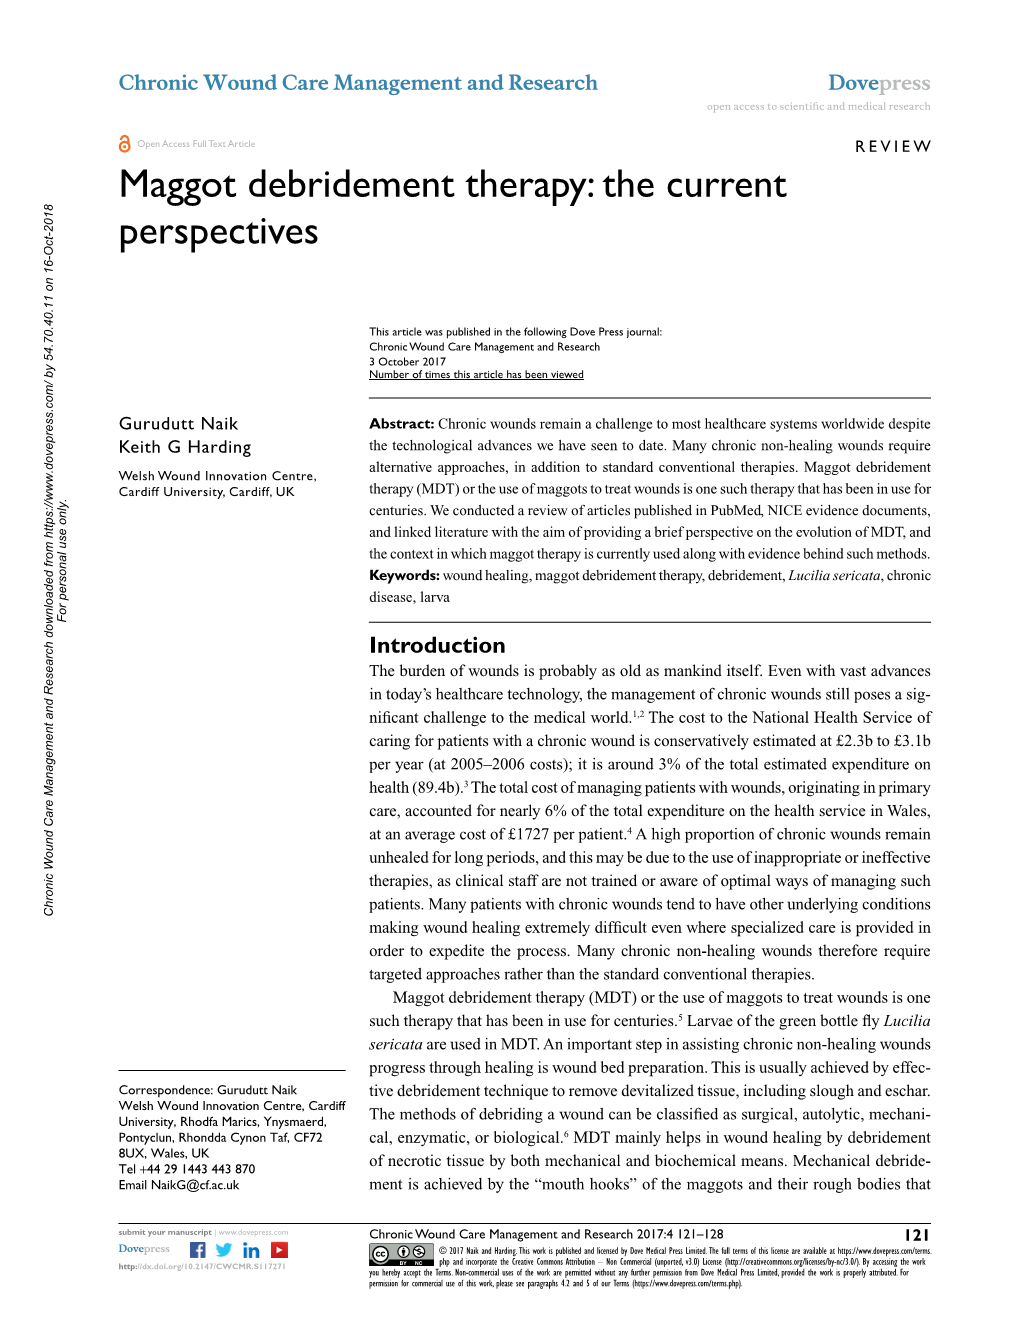 Maggot Debridement Therapy: the Current Perspectives